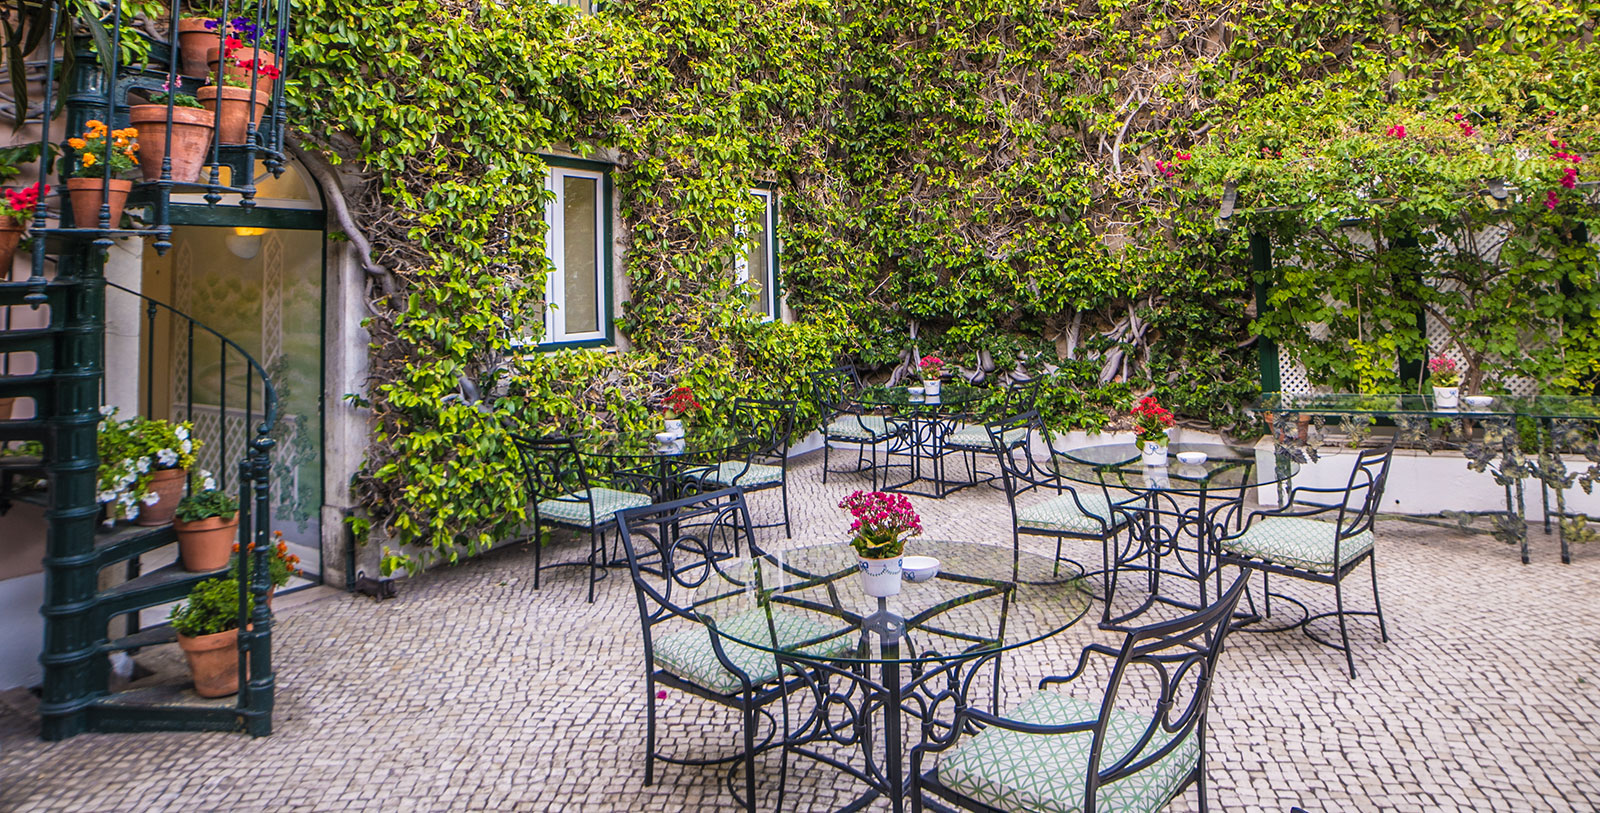 Image of the garden courtyard at As Janelas Verdes, 18th century, a member of Historic Hotels Worldwide in Lisbon, Portugal